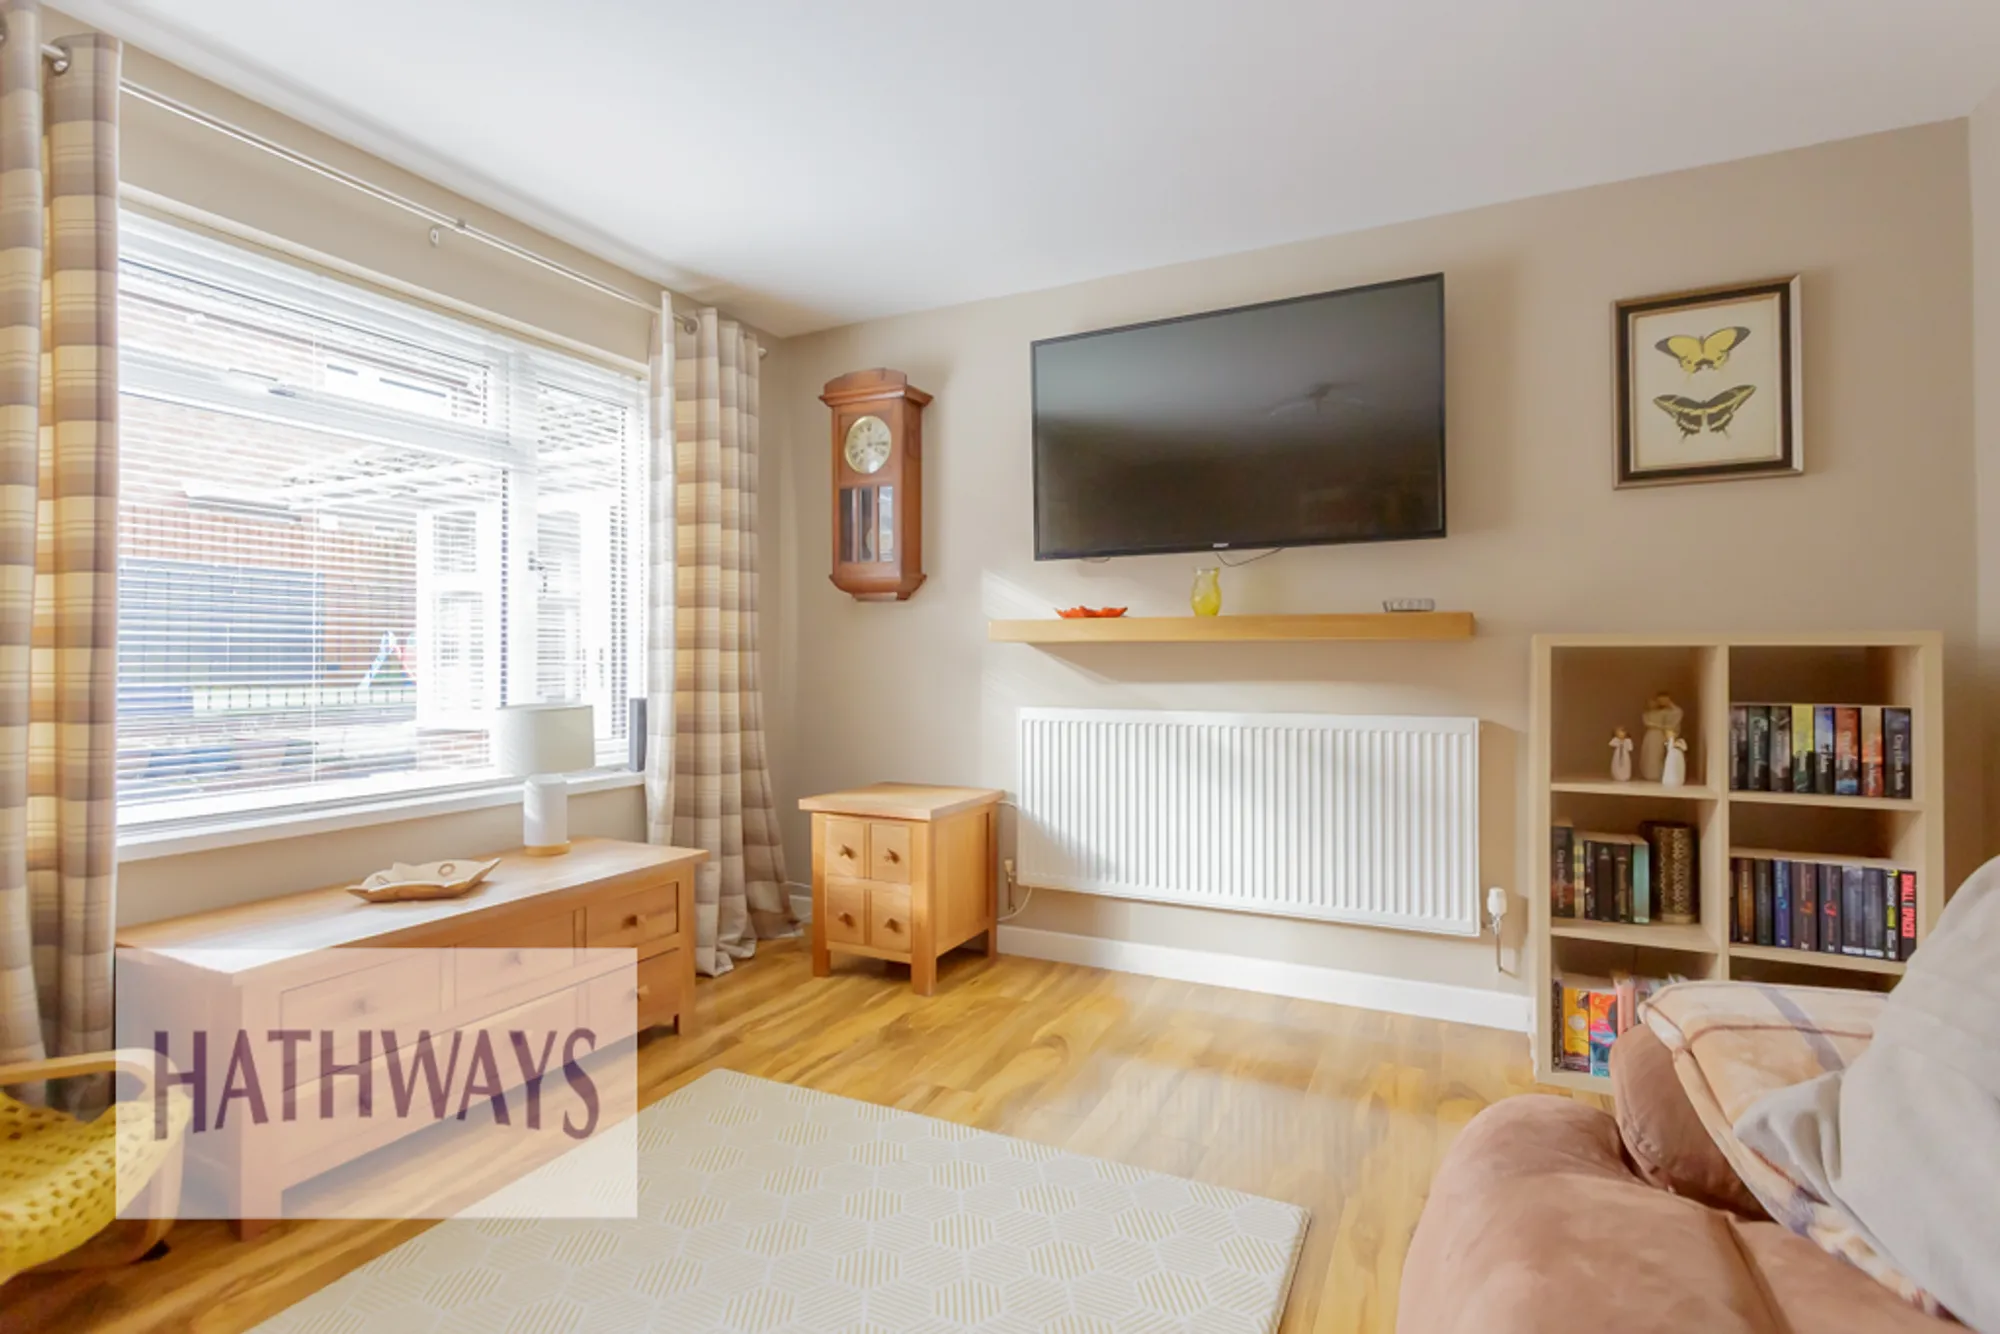 3 bed mid-terraced house for sale in East Roedin, Cwmbran  - Property Image 5